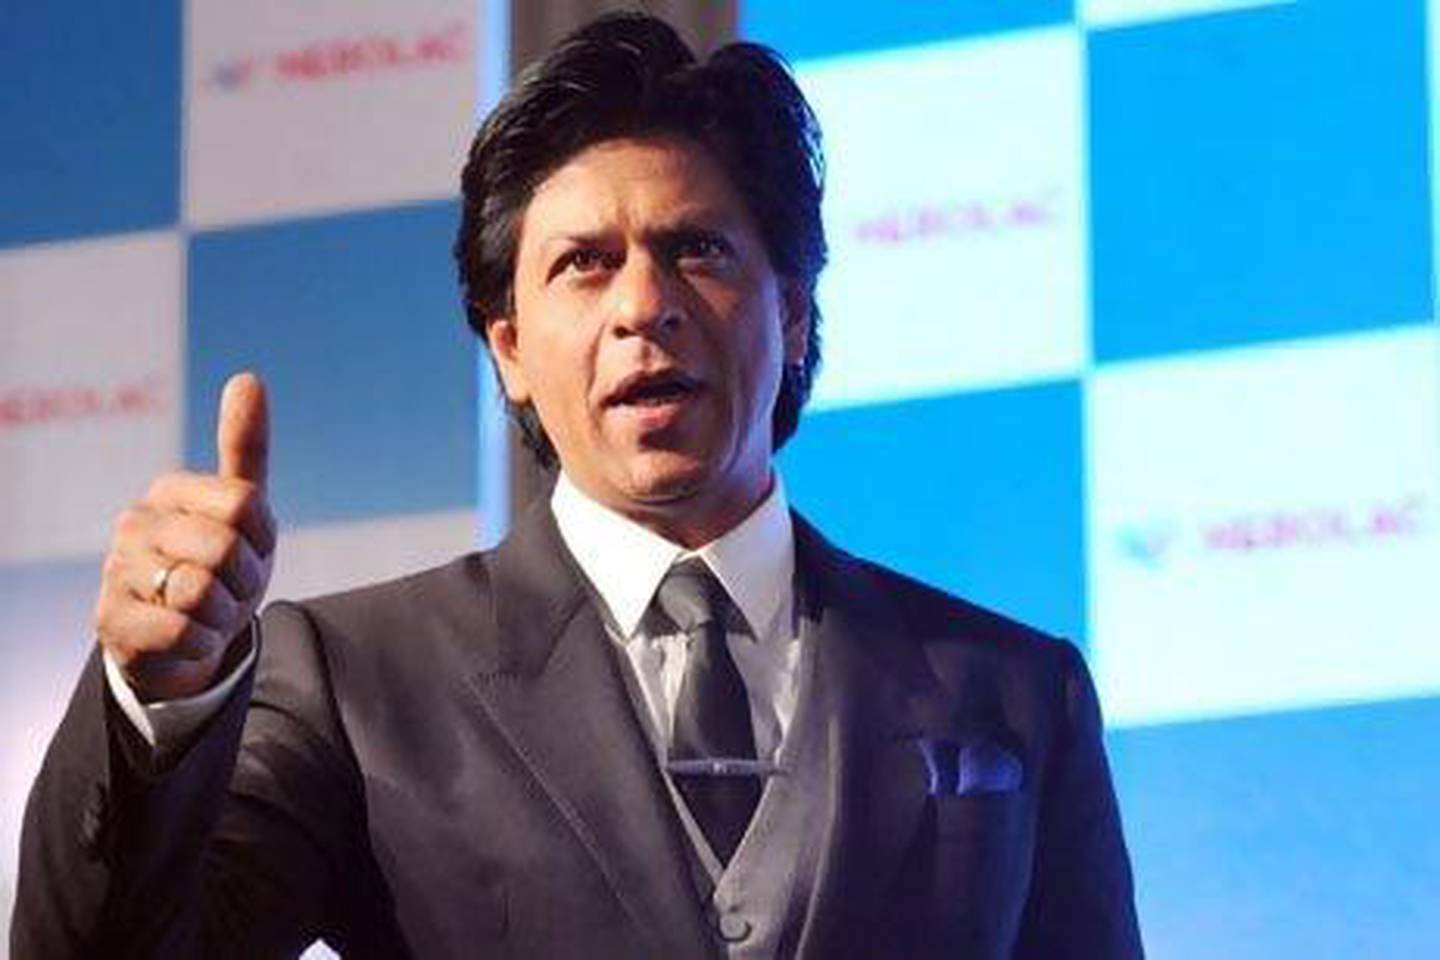 Shah Rukh Khan is set to launch a new streaming platform, called SRK+, the actor announced on Twitter. AFP